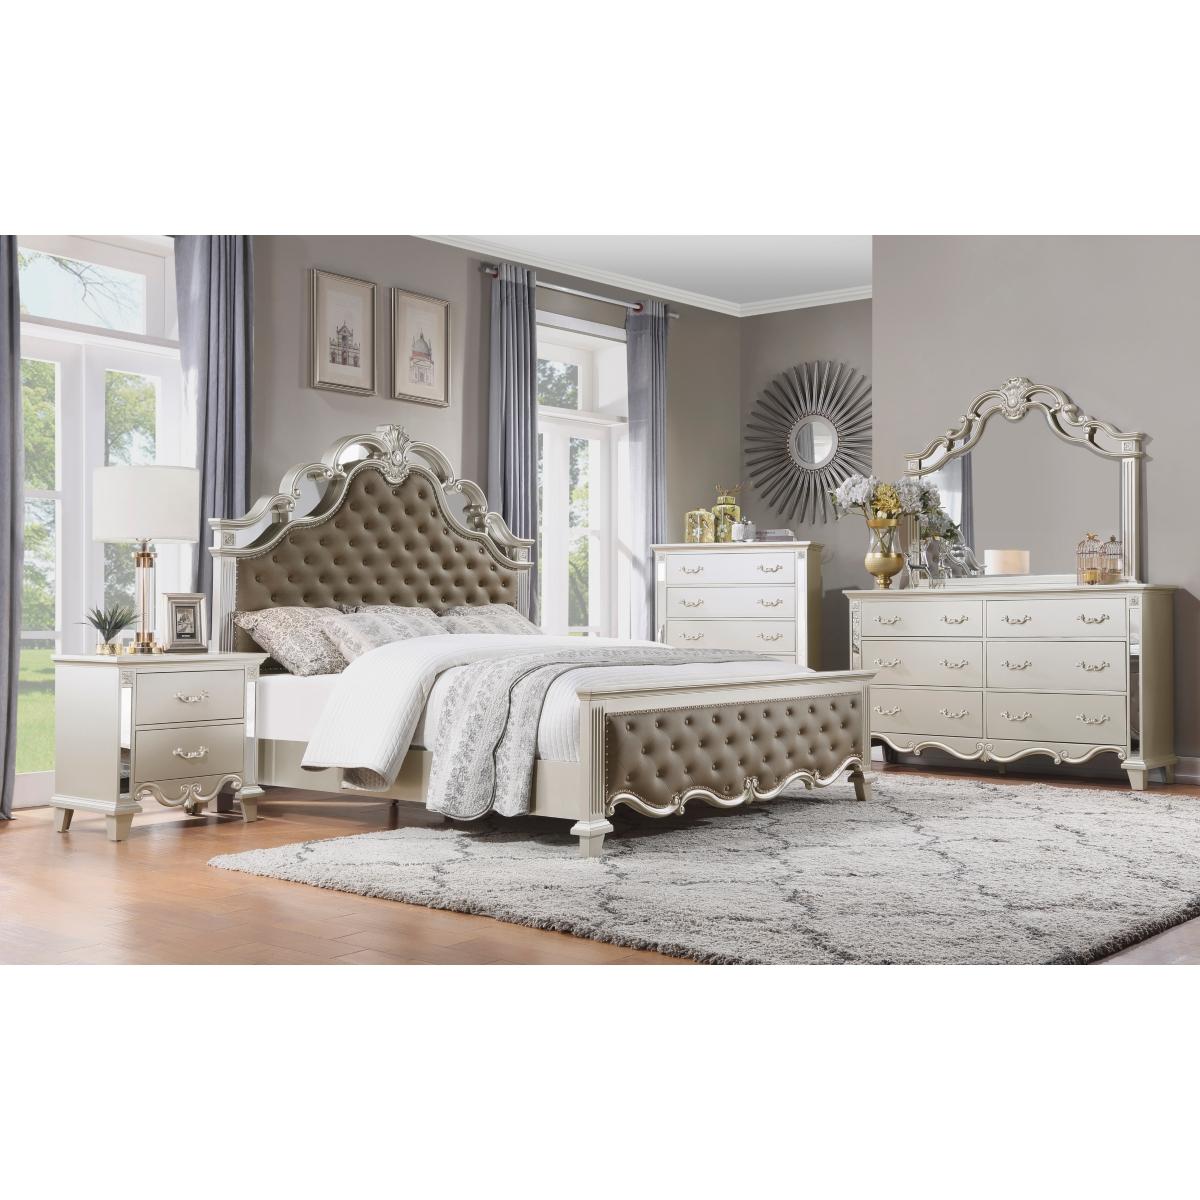 Traditional Bedroom Set 1429K-1CK*6PC Ever 1429K-1CK*6PC in Champagne Faux Leather